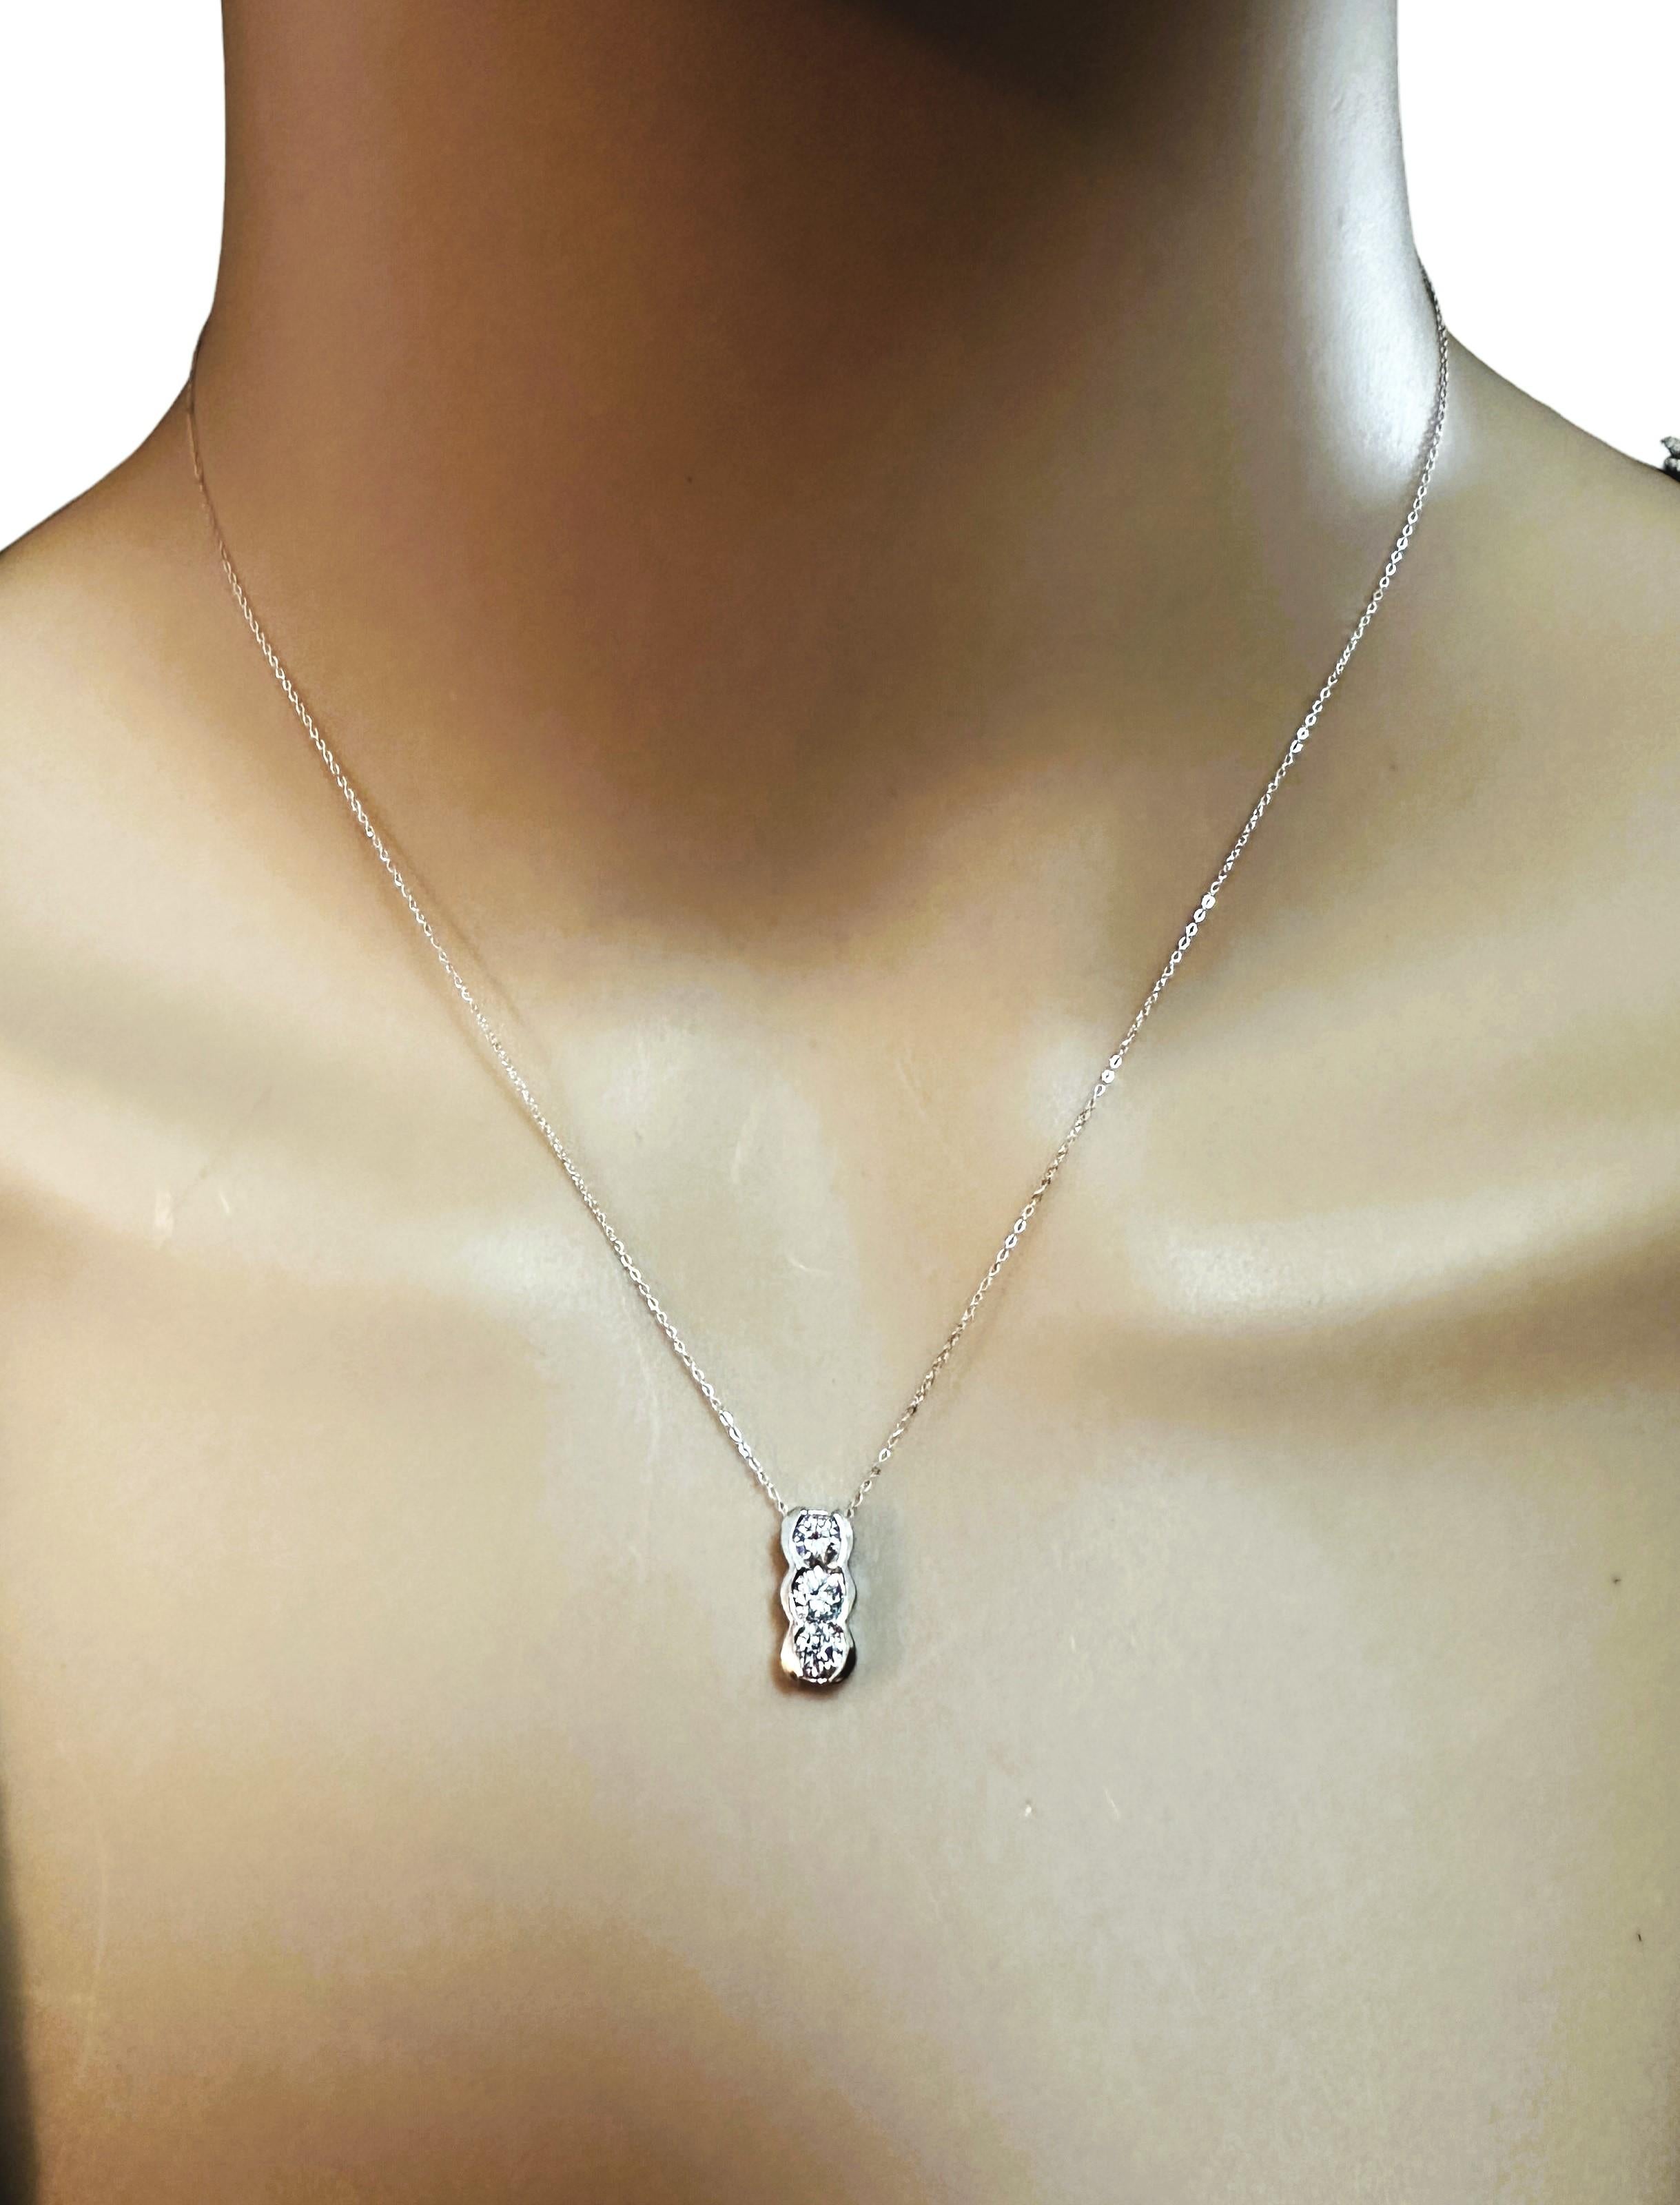 I just love this necklace!  It's just a simple and elegant design and can be worn for any occasion.   It has 3 brilliant cut diamonds measuring  3.5 x 3.5 x 2.16 mm. The Clarity is SI1 and the Color is H.  They total .5 carats.  The necklace is 16